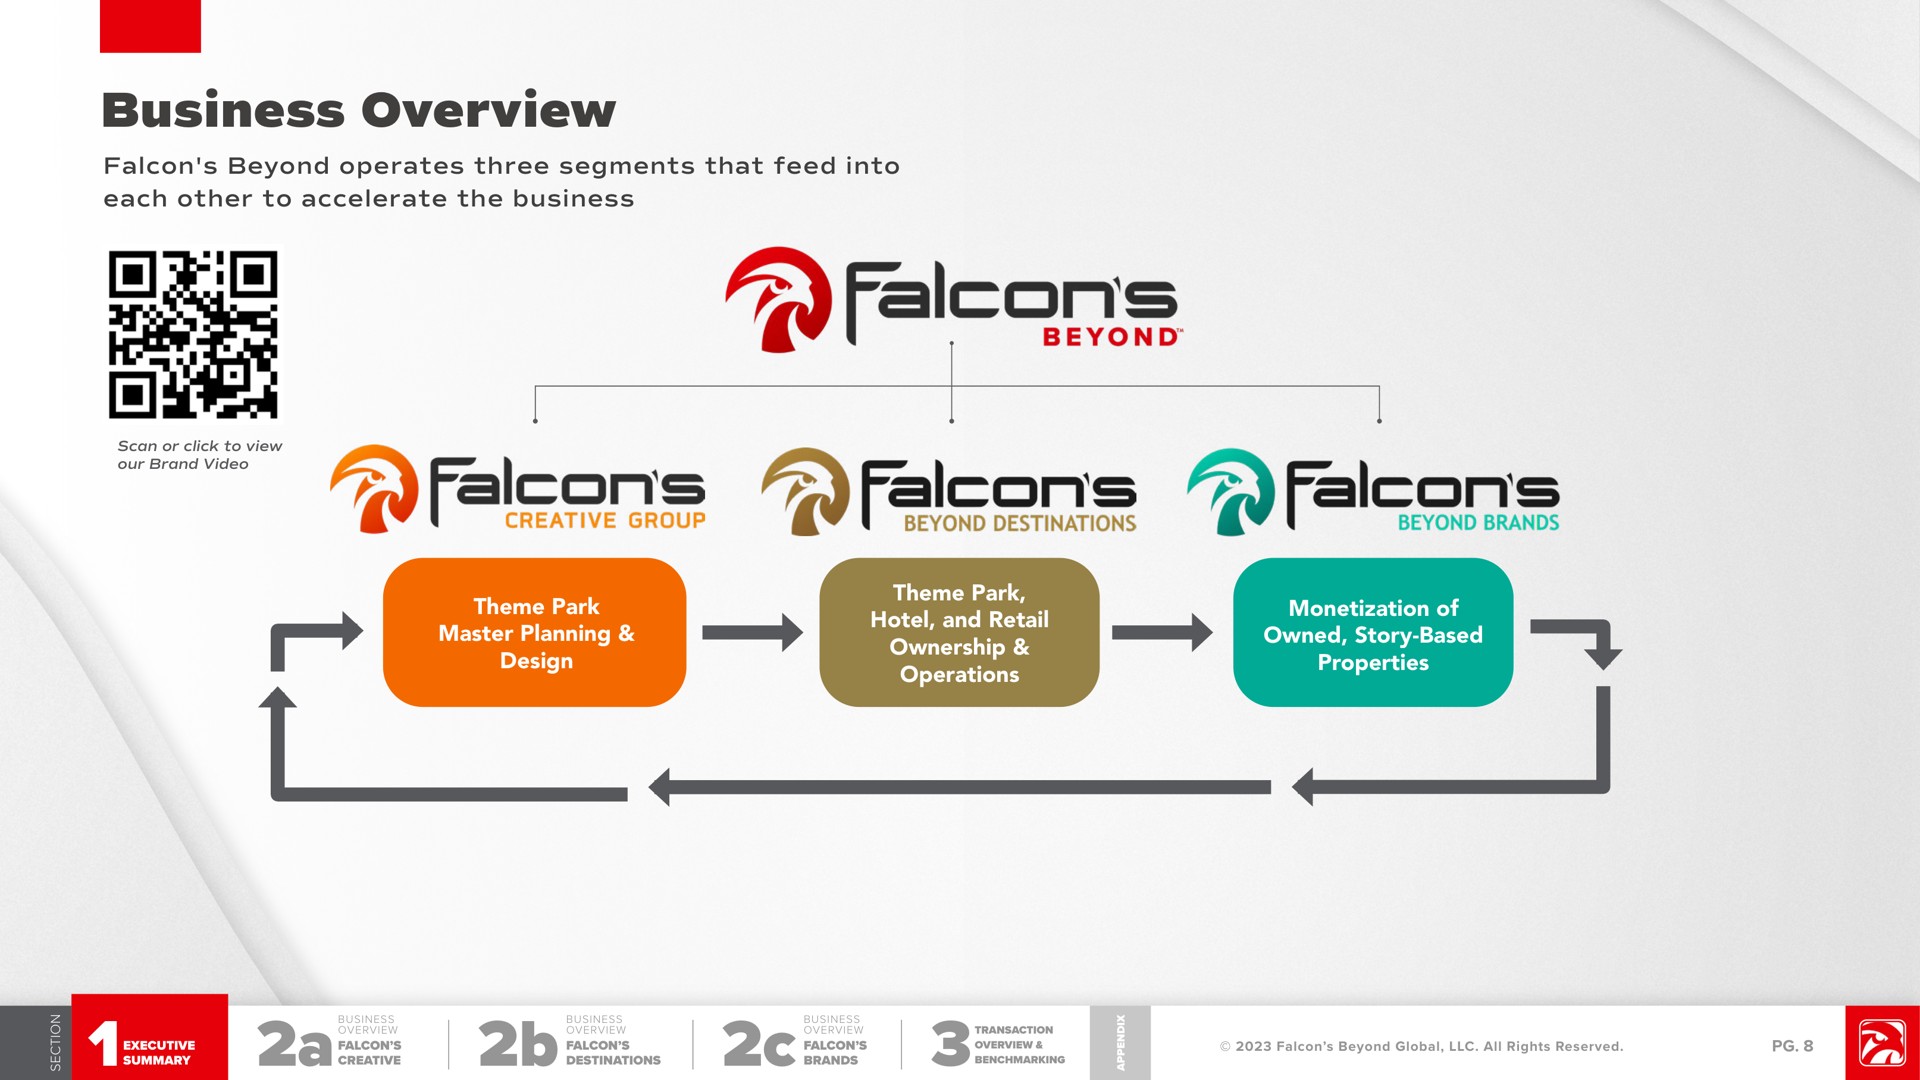 business overview falcon beyond operates three segments that feed into each other to accelerate the business ale falcons a falcons | Falcon's Beyond